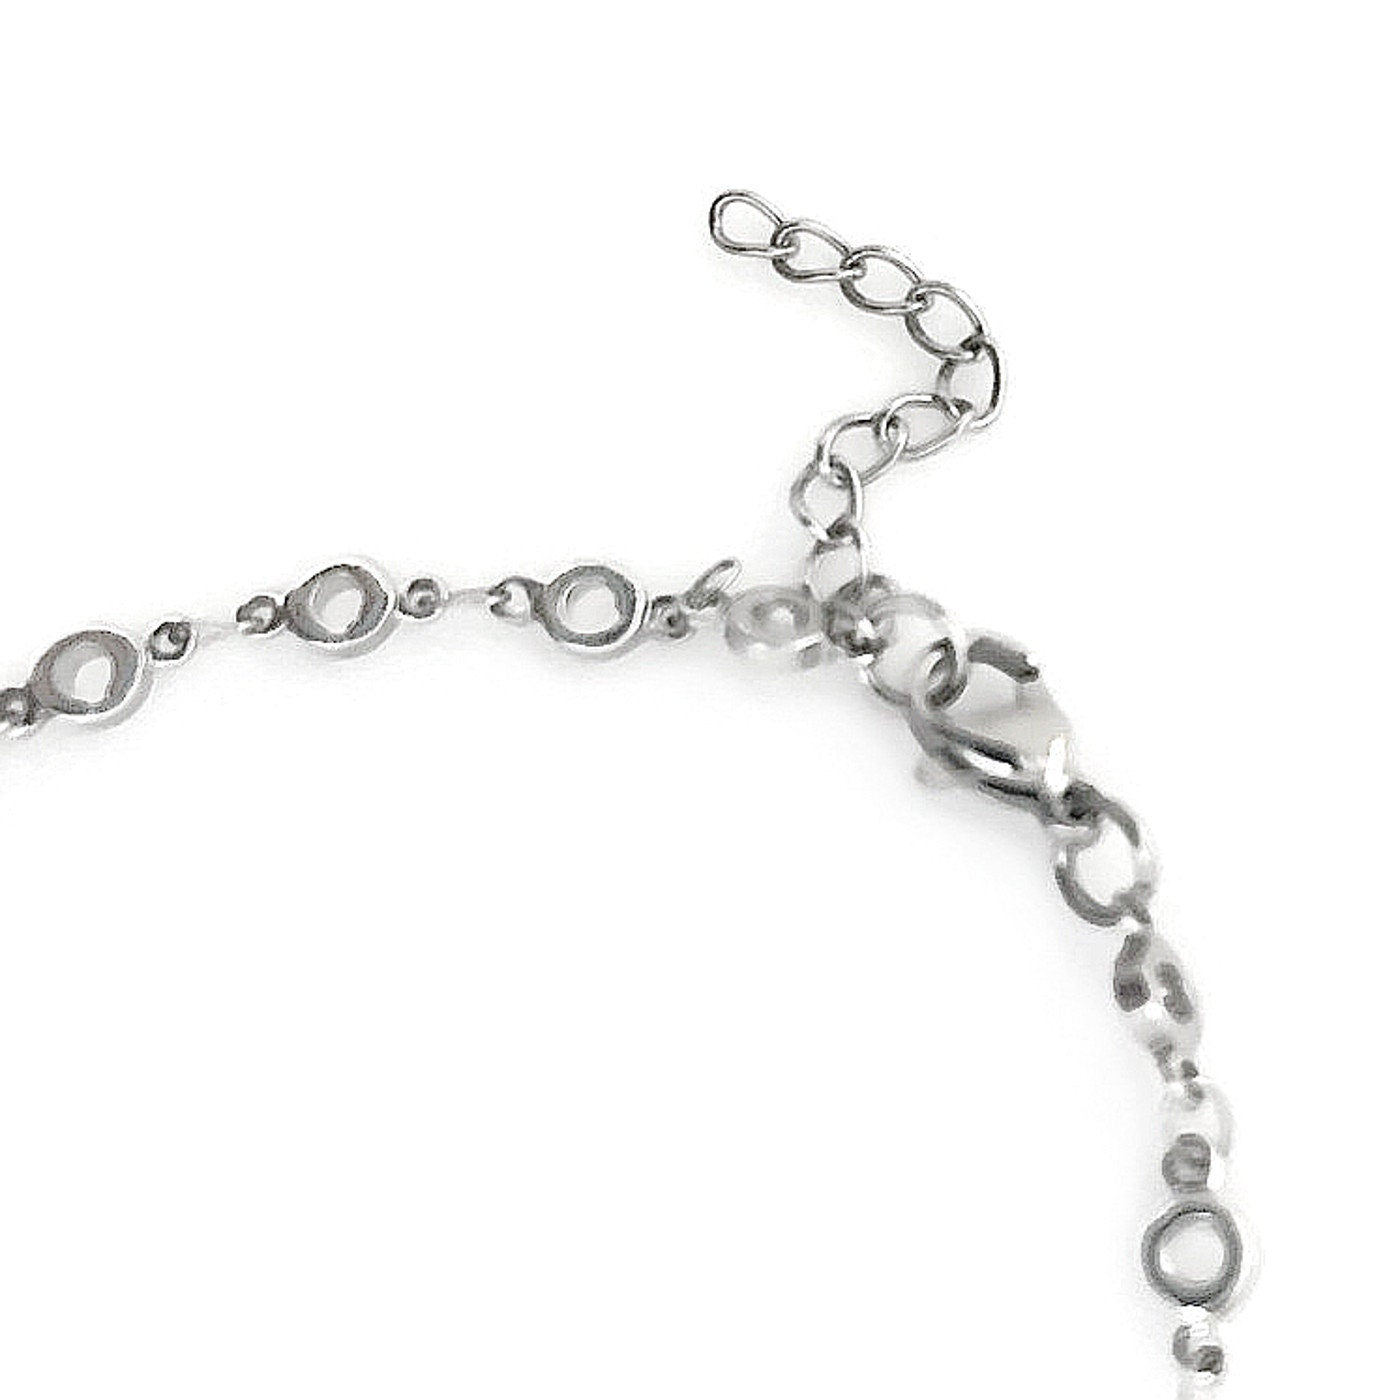 Thin Open Circle Chain Bracelet, Stainless Steel Jewelry for Women,  Adjustable Charm Bracelet, Stackable Wrist Candy